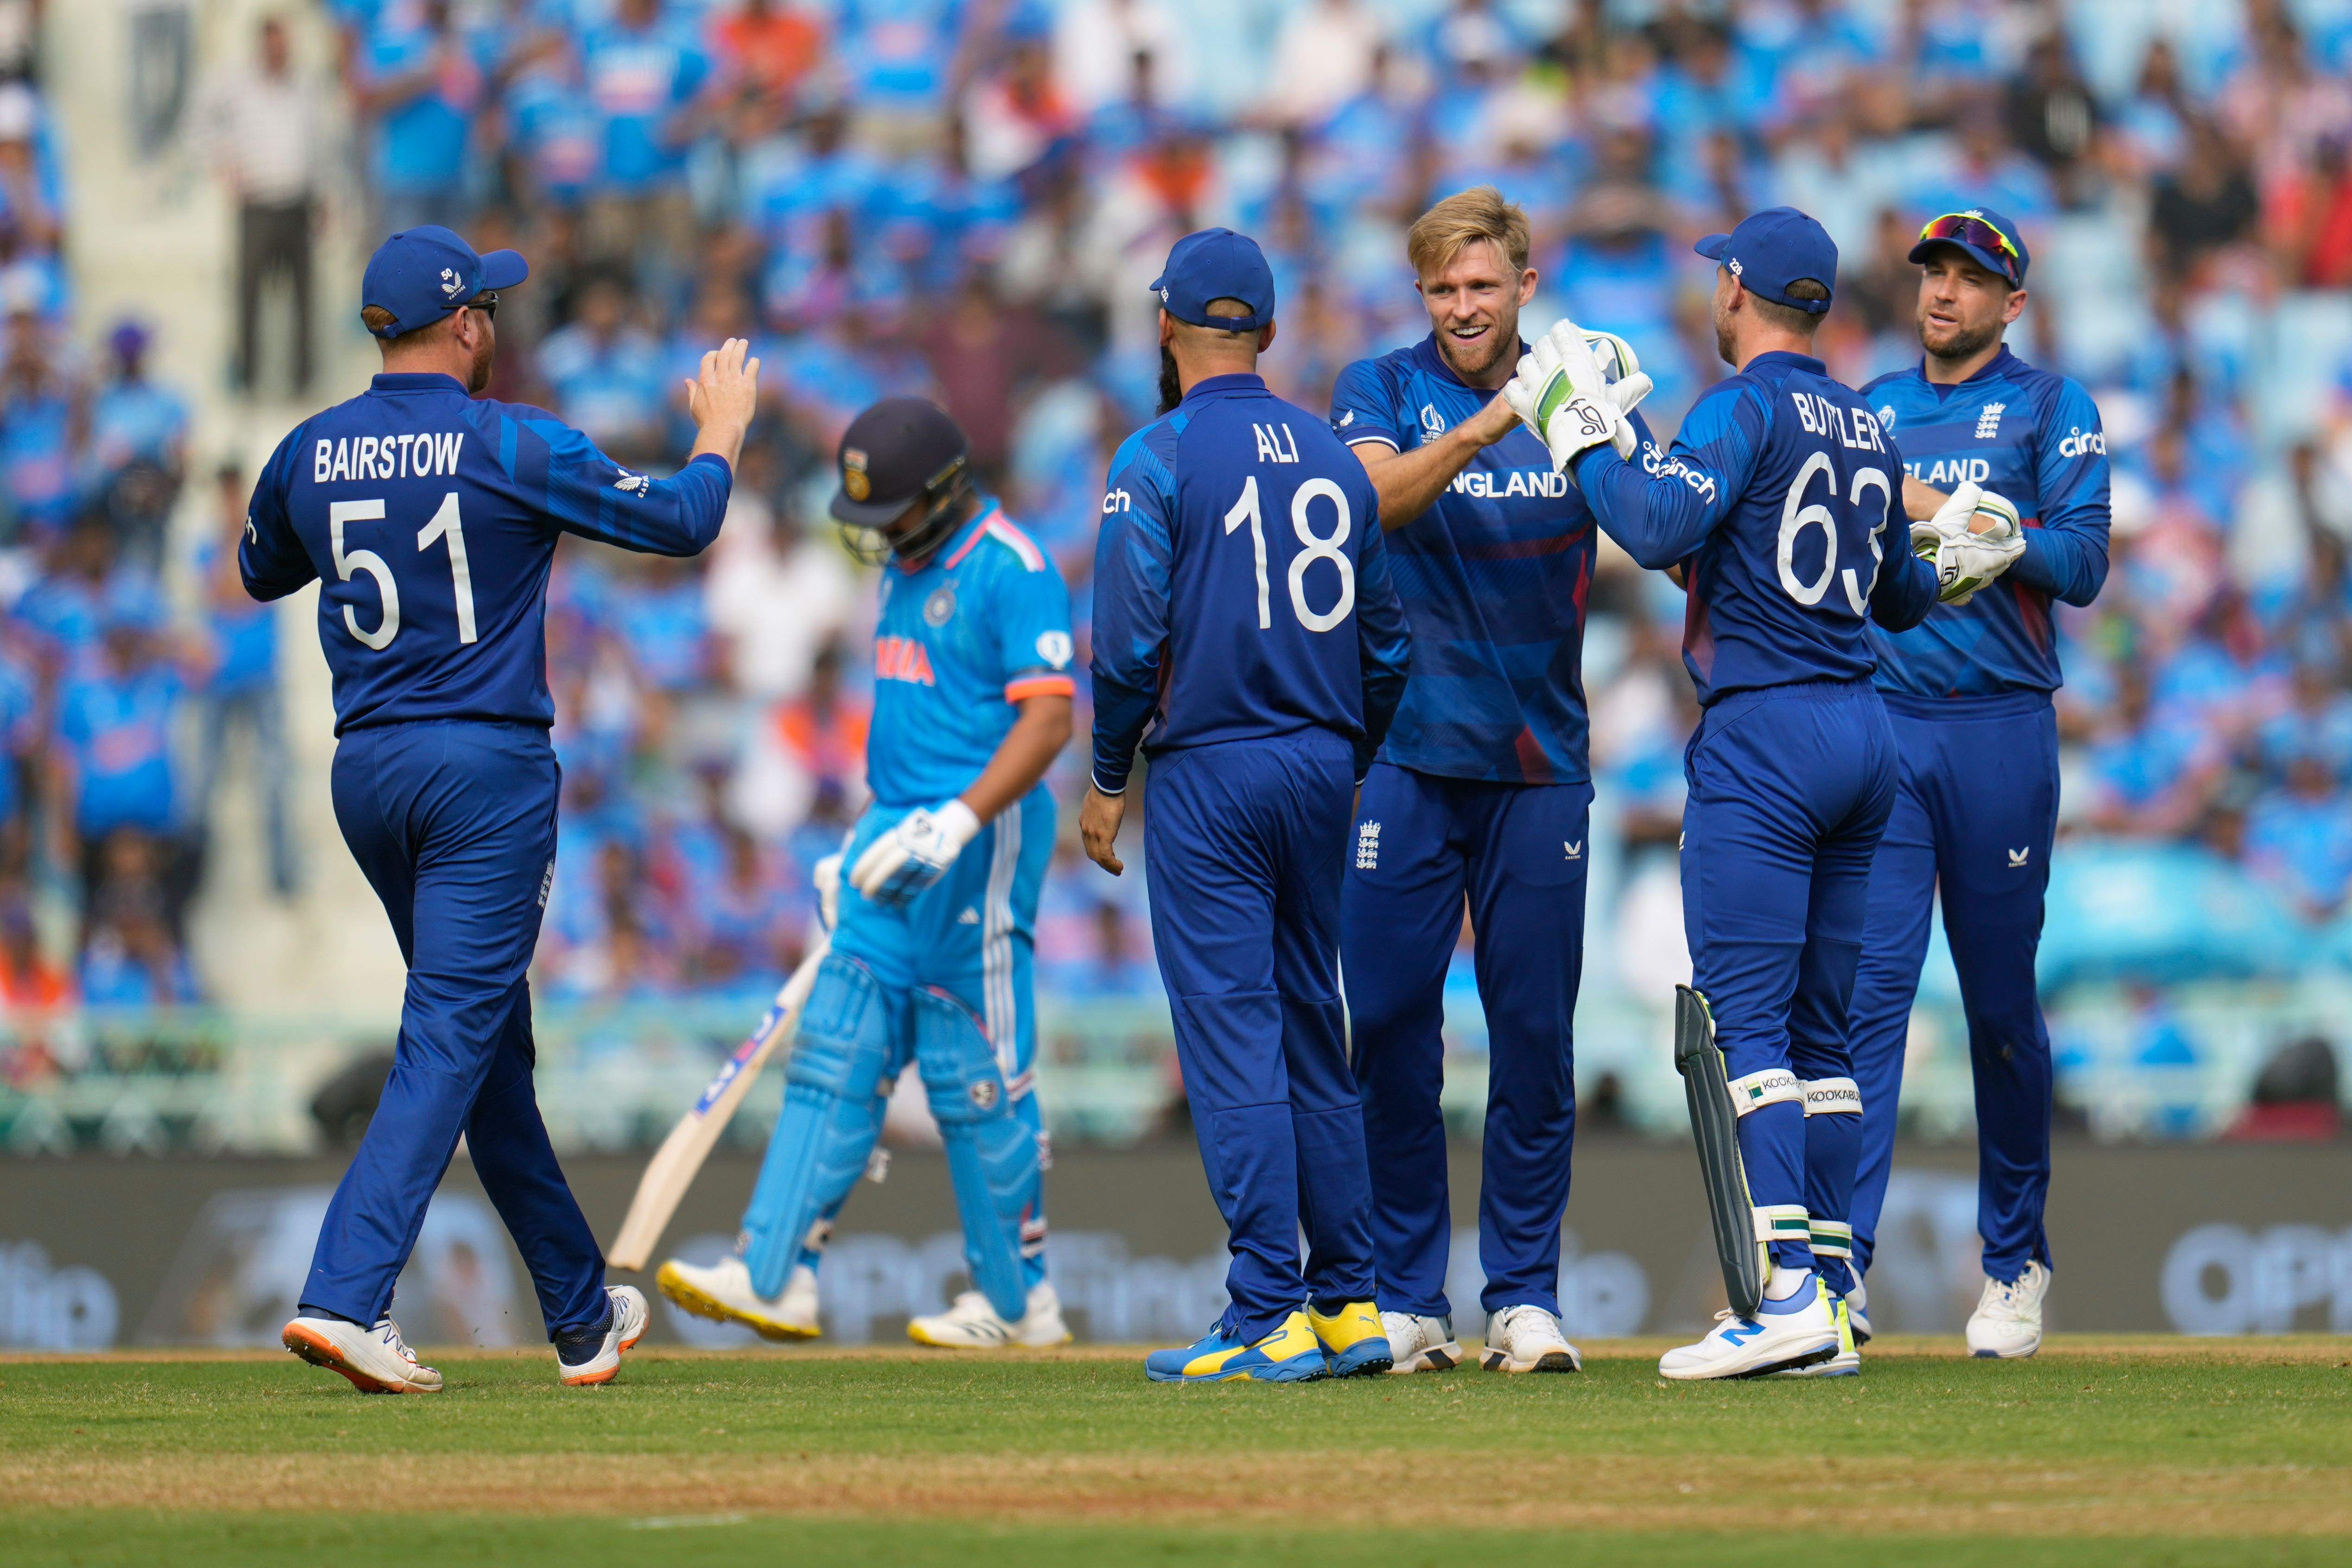 England’s David Willey (third from right) celebrates taking the wicket of India’s Virat Kohli (second from left) during the World Cup pool match in Lucknow (Aijaz Rahi/AP)